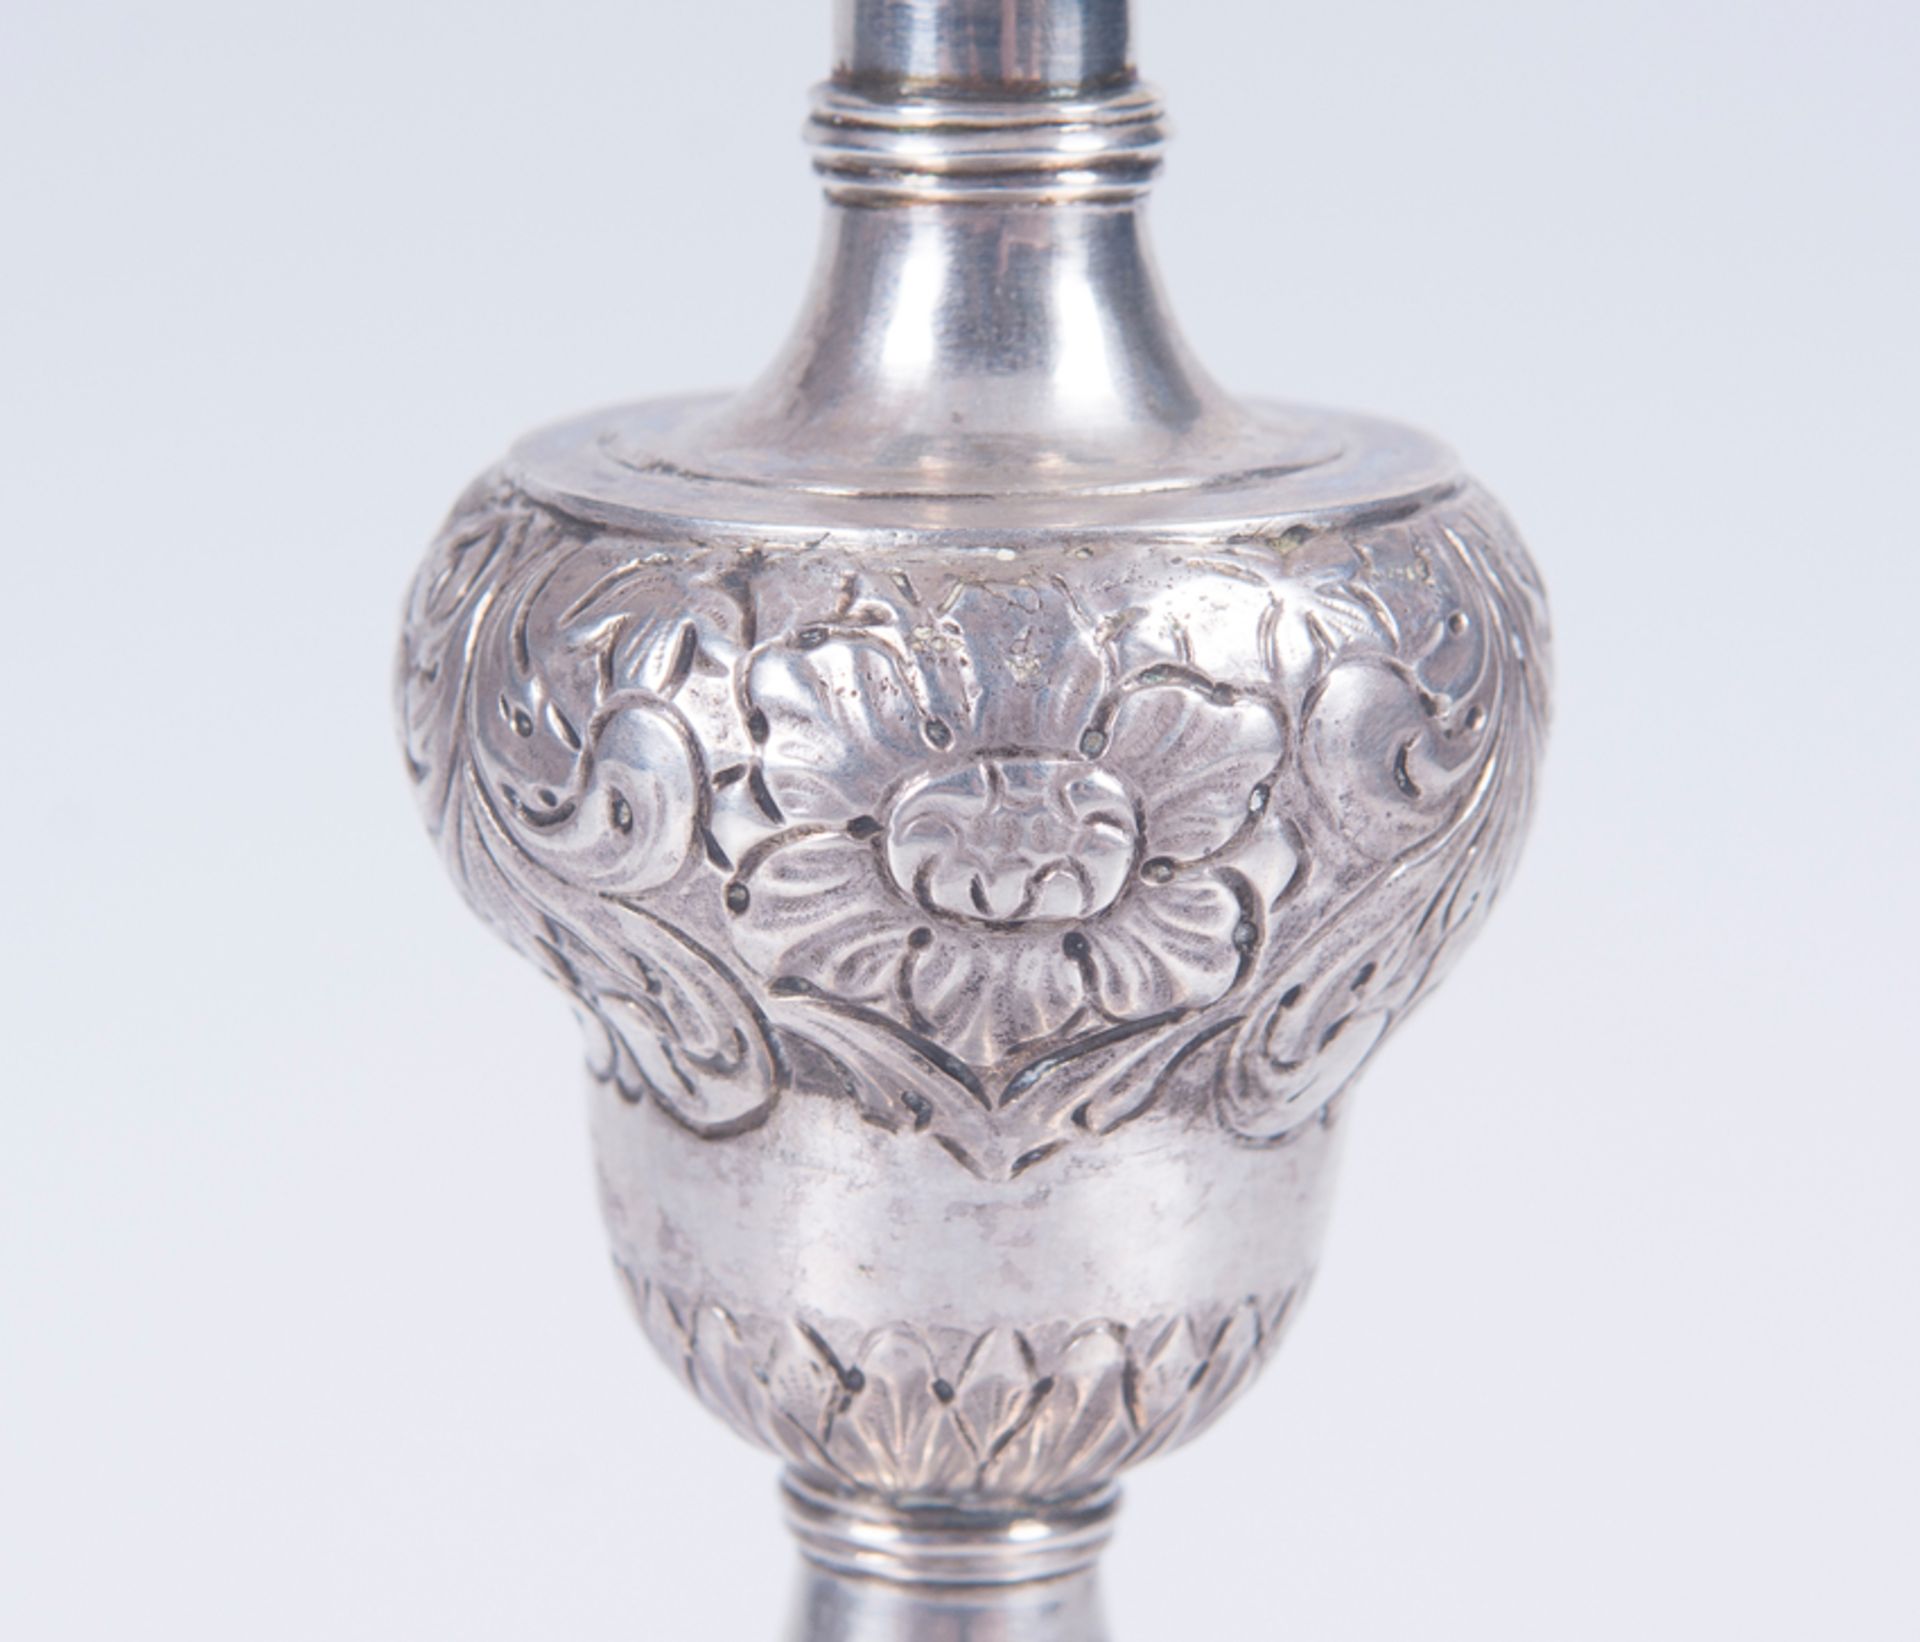 Embossed and chased silver chalice with a silver vermeil interior. Possibly Mexican. Late 16th cent - Bild 5 aus 8